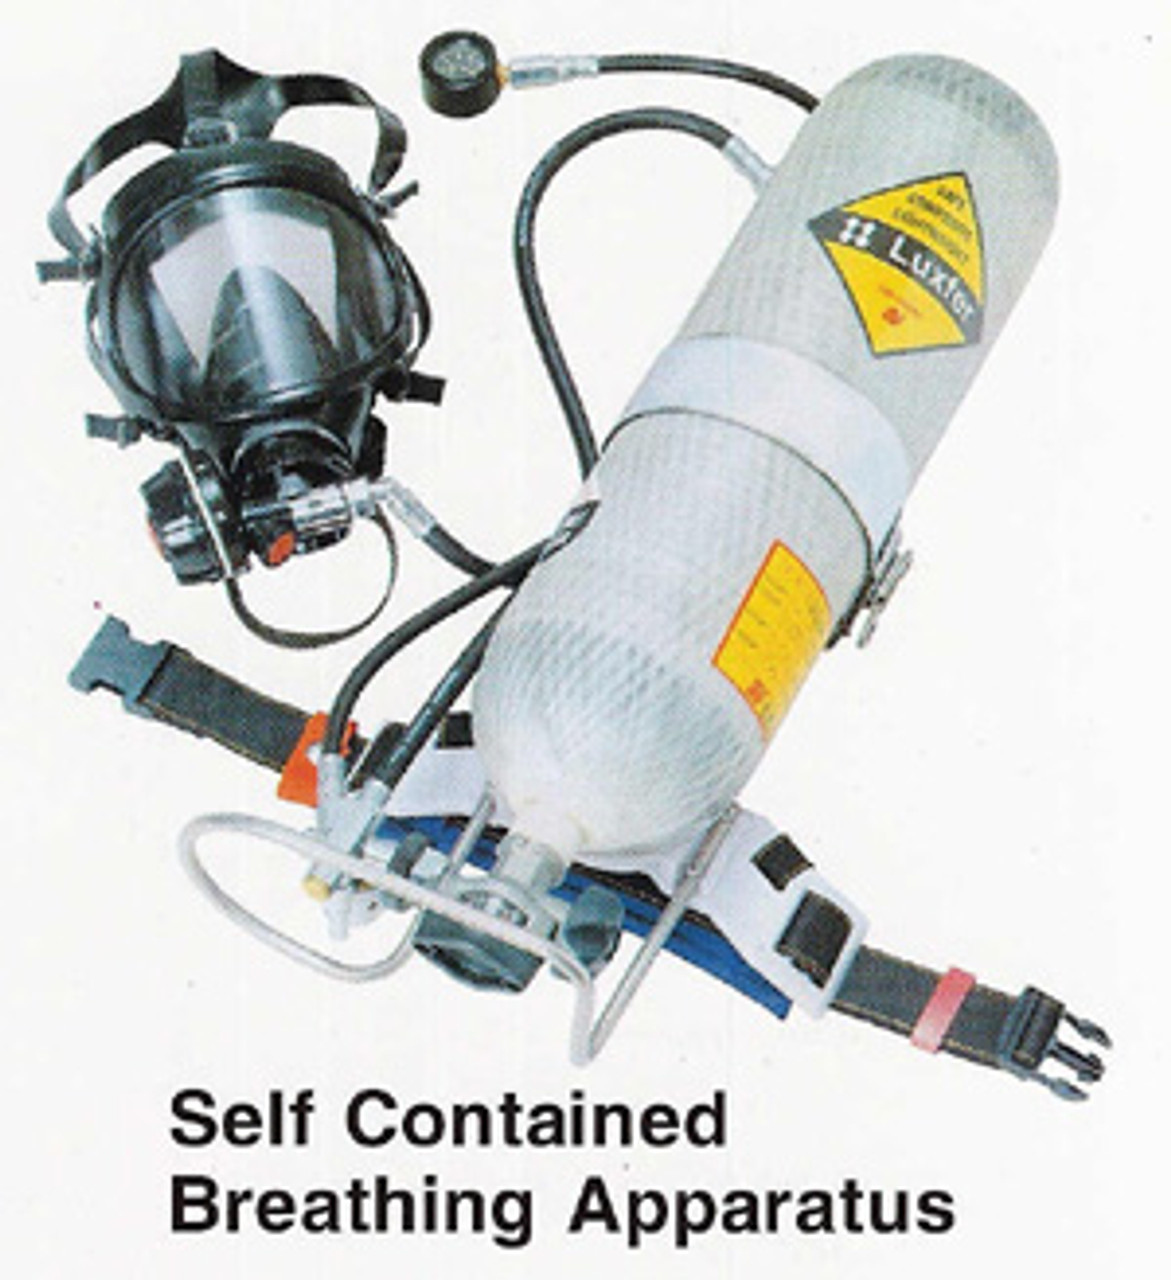 AIR FILLED SPARE CYLINDER FOR MSA ULTRALITE II 8.4LTR - IMPA 330422